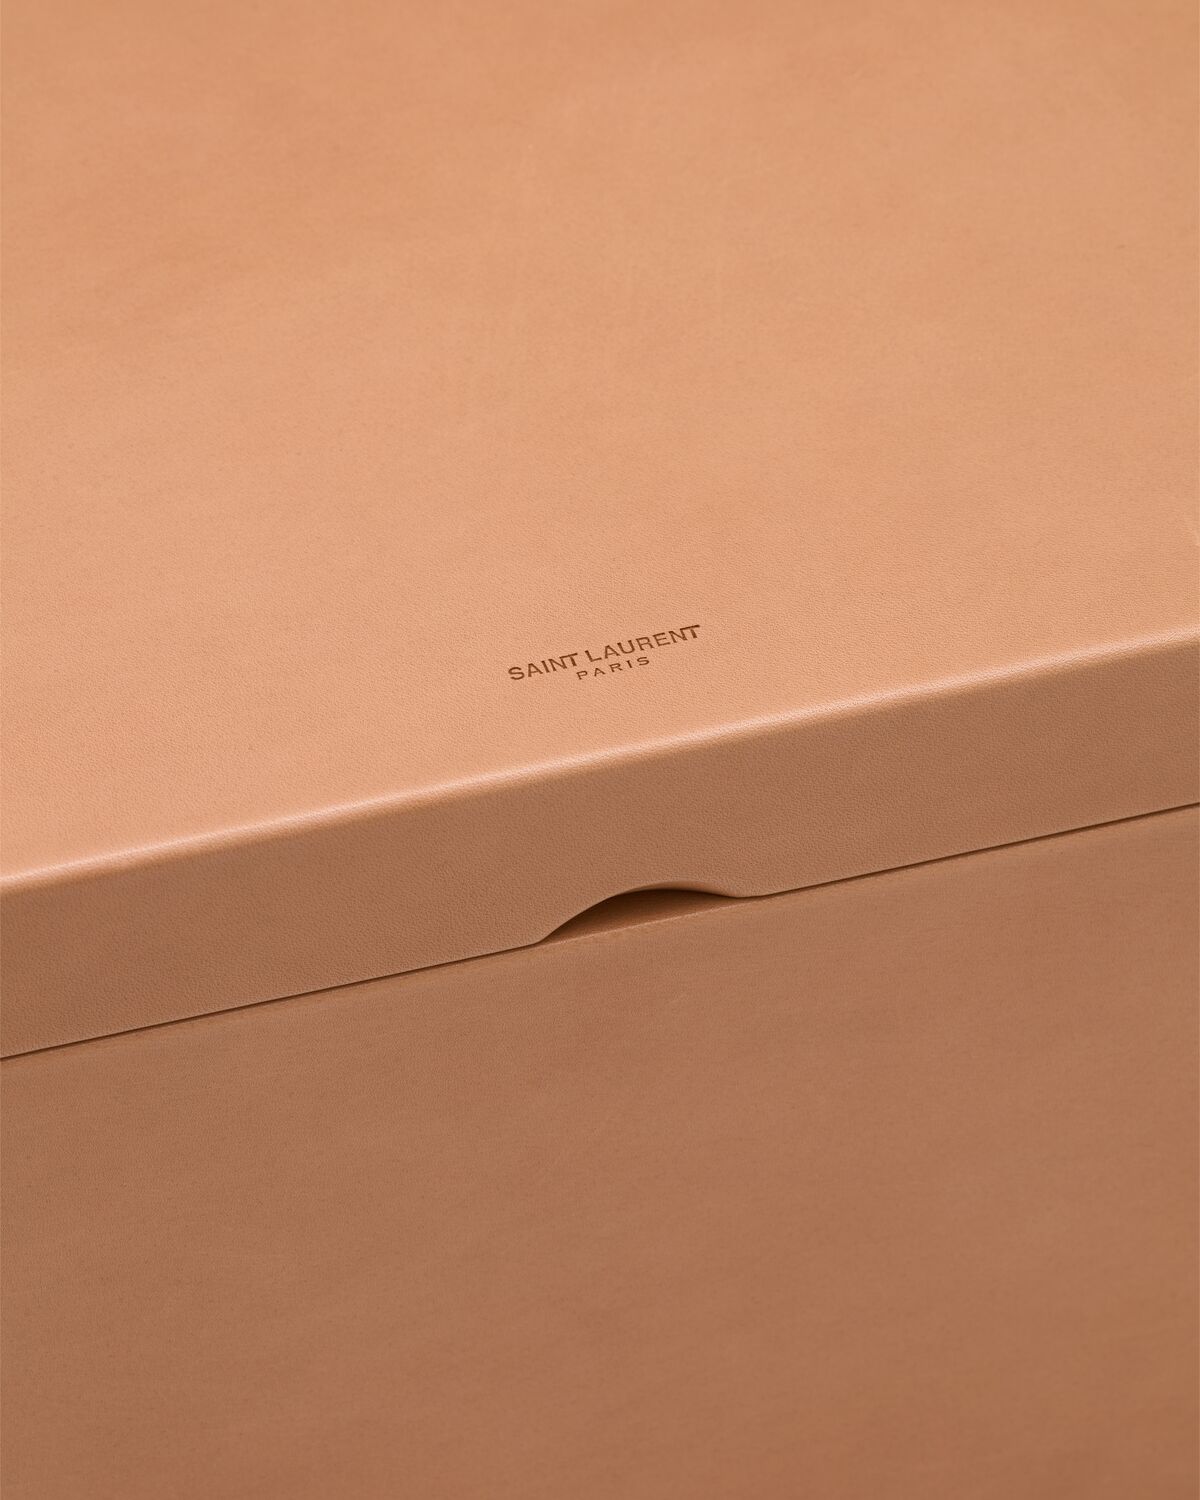 LARGE BOX IN VEGETABLE-TANNED LEATHER